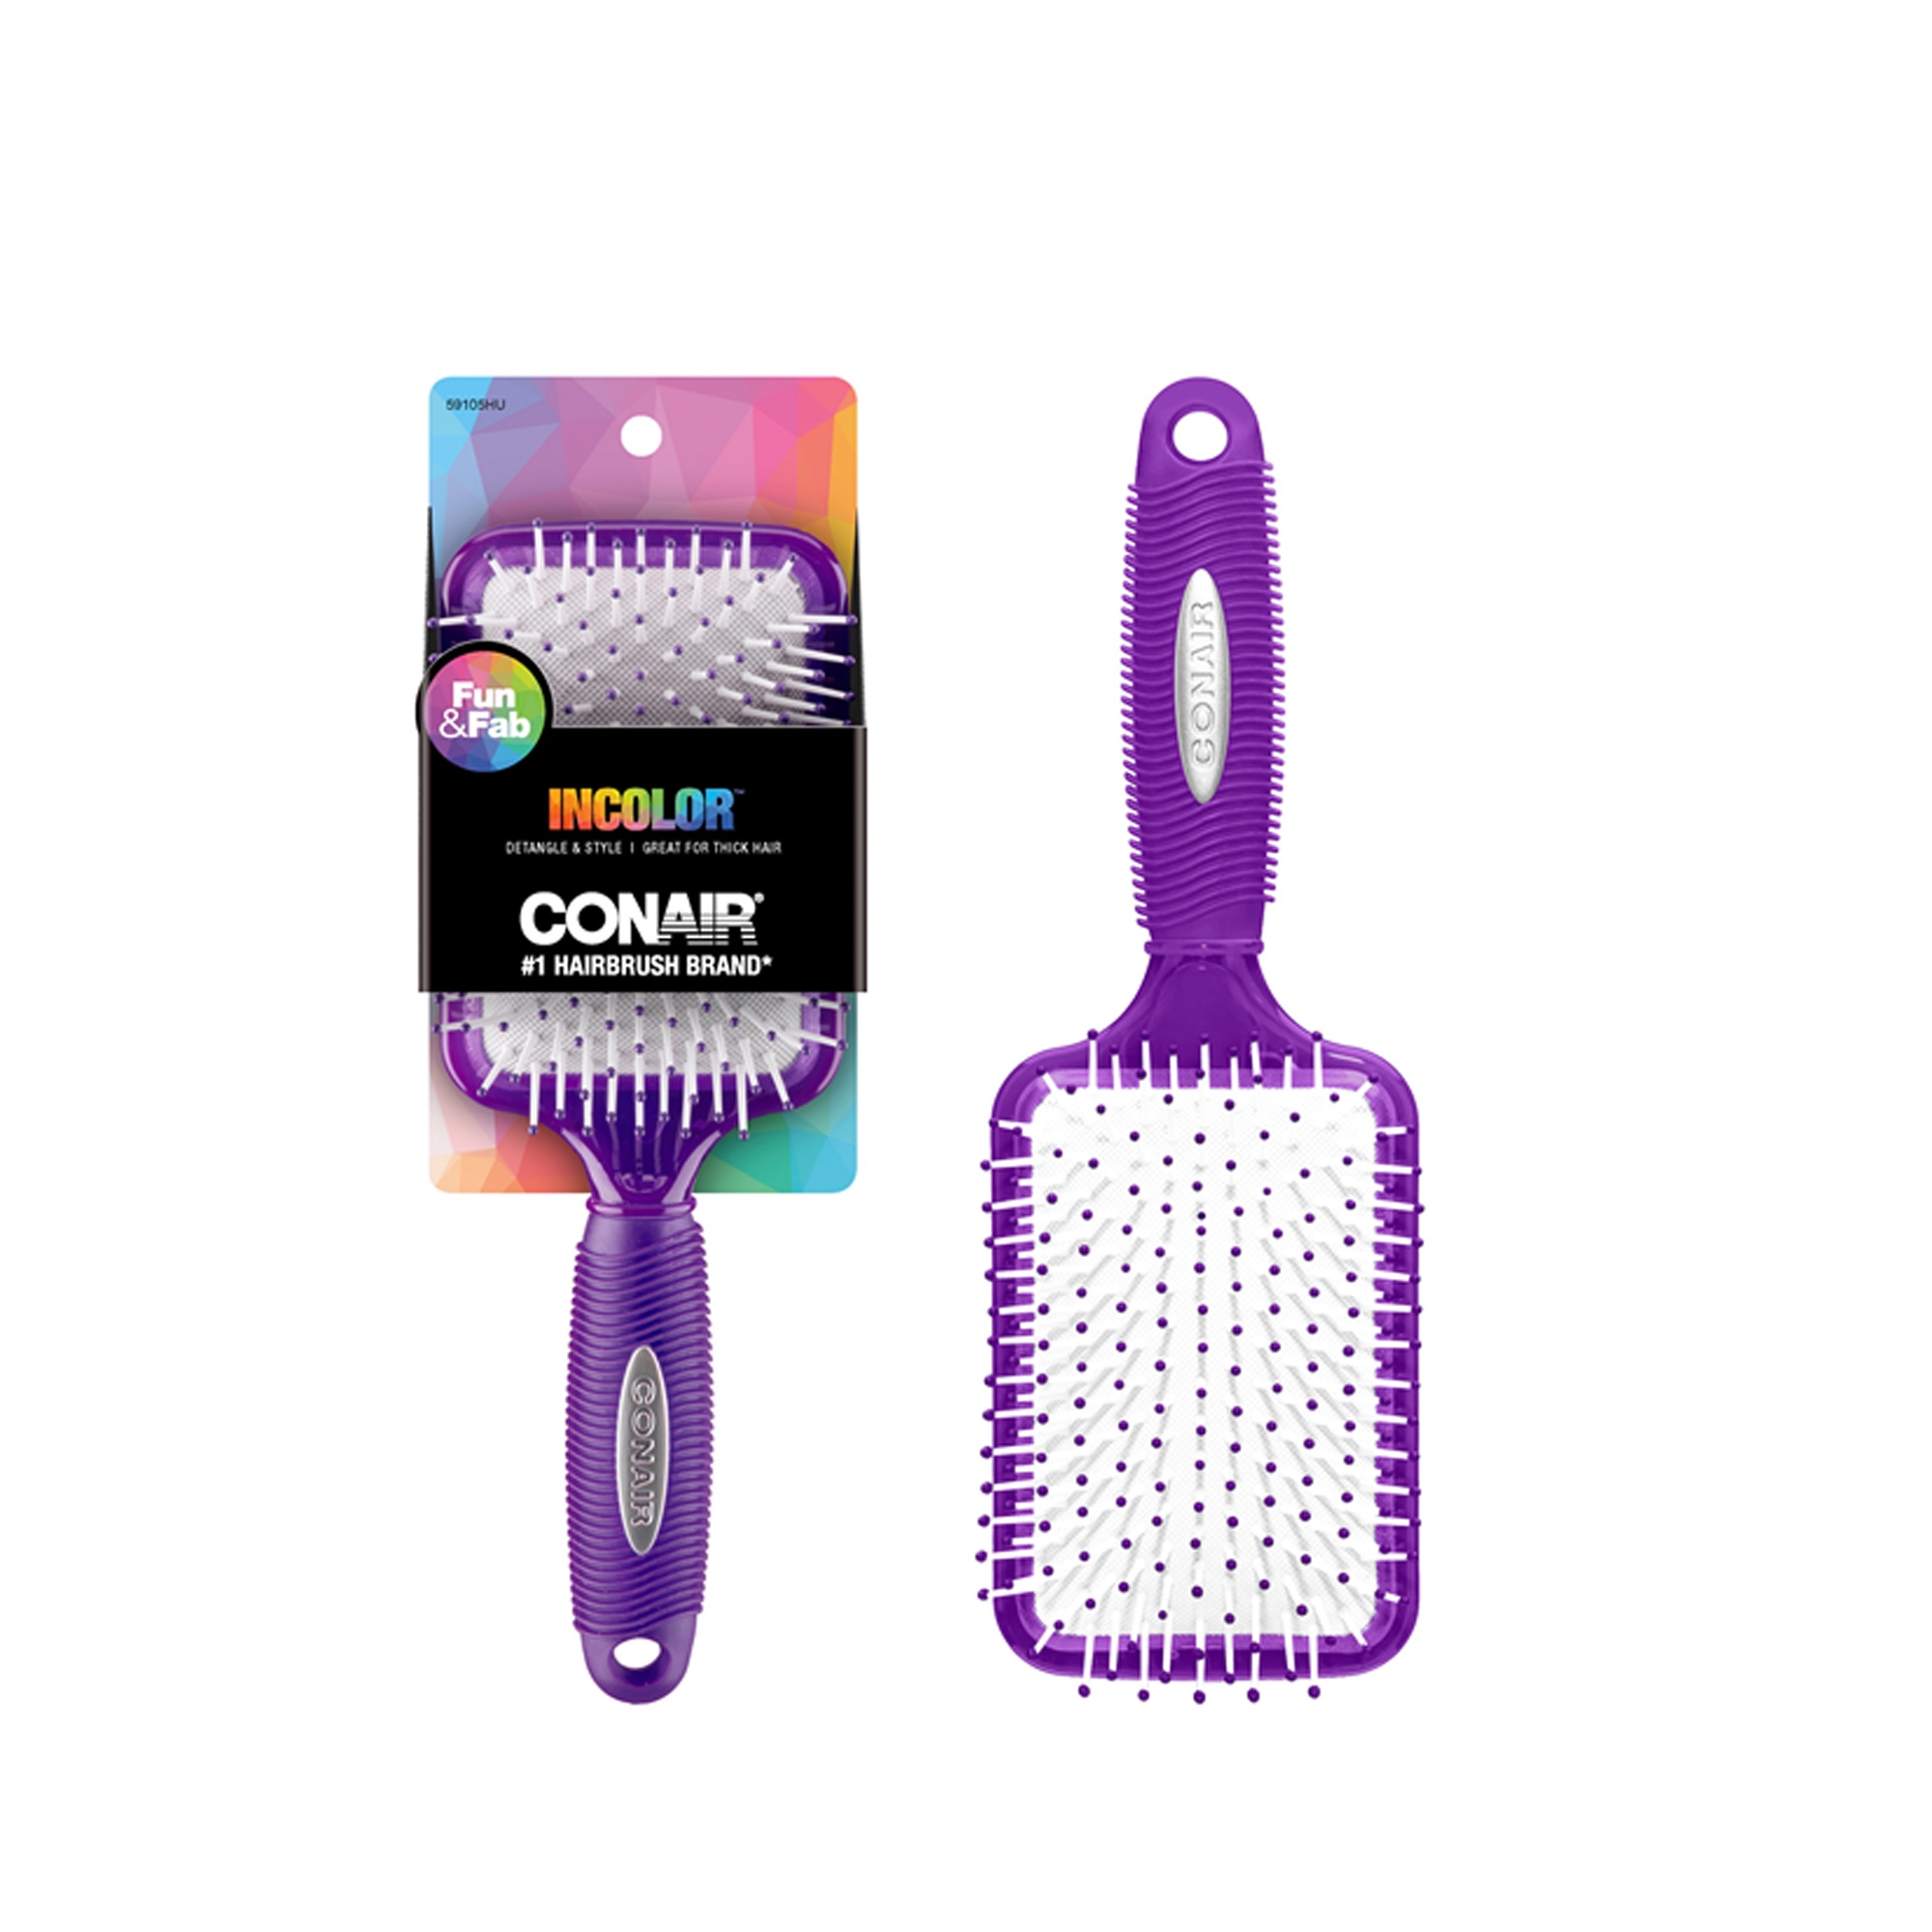 Conair in Color Nylon Bristle Paddle Hairbrush, Colors Vary - image 5 of 9